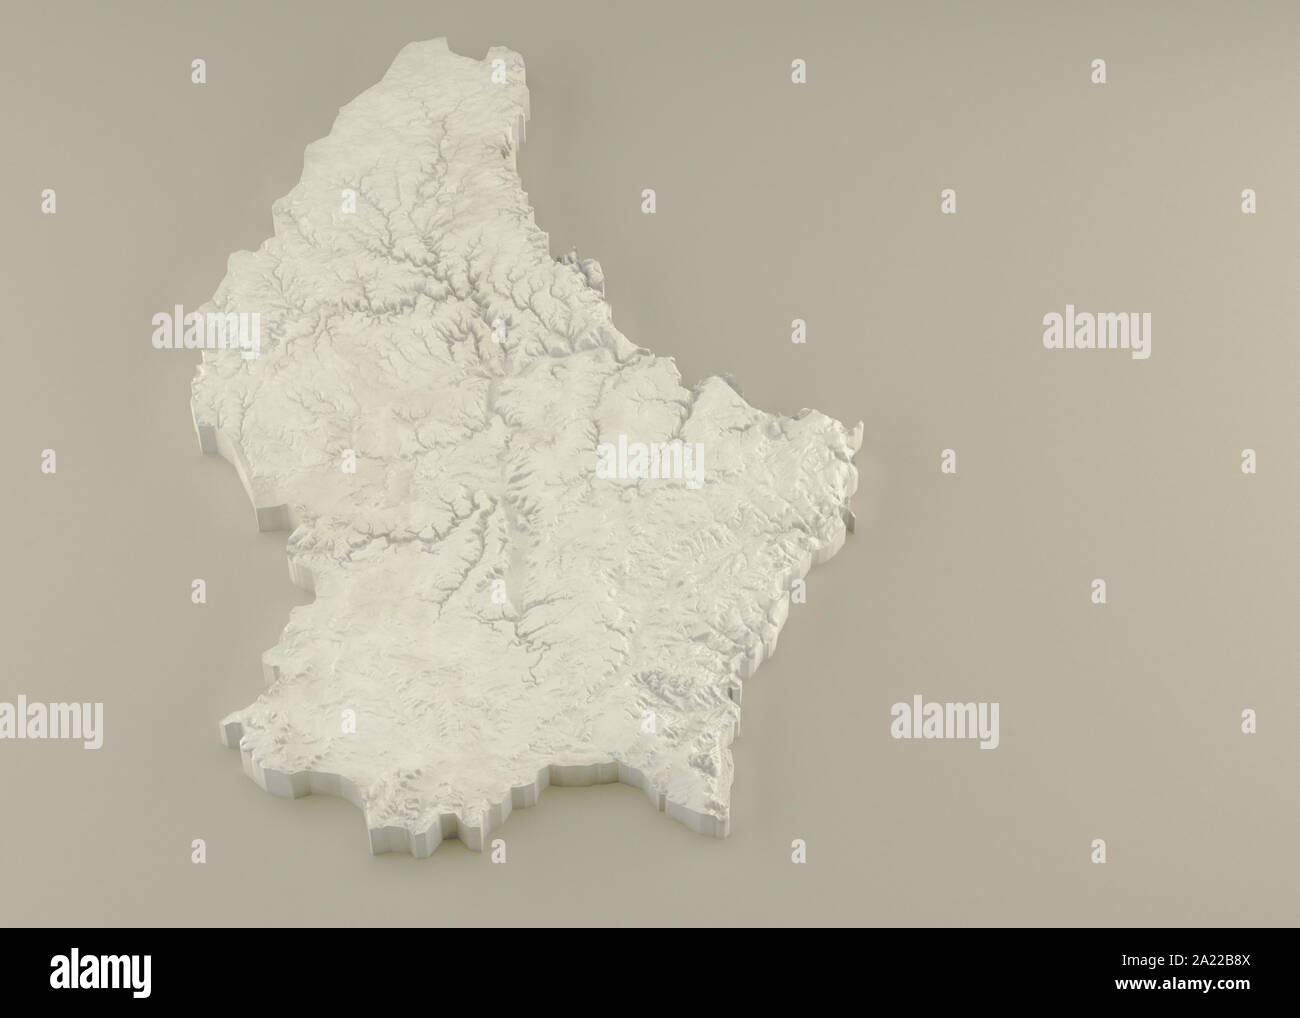 Extruded 3D political Map of Luxembourg with relief as marble sculpture on a light beige background Stock Photo